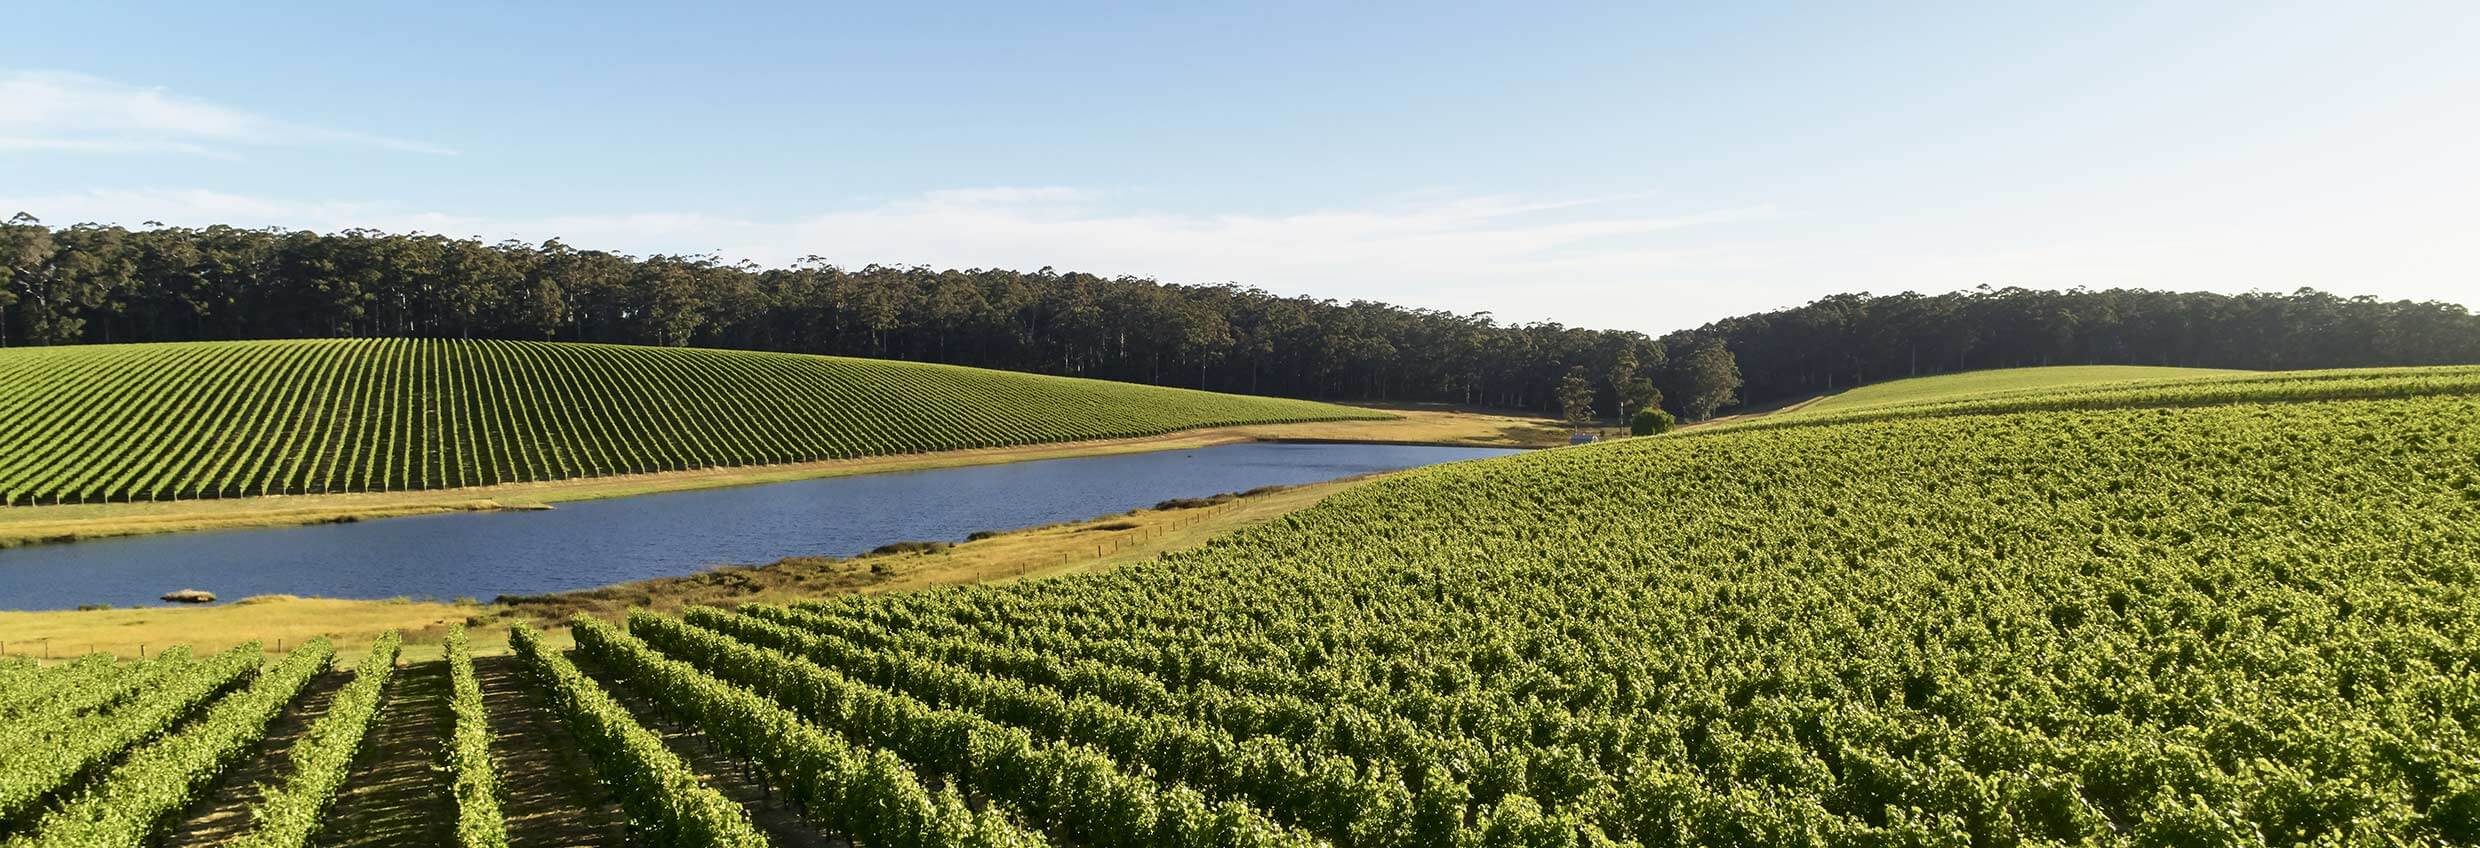 gently rolling rows of green vines span a valley with a lake cutting across the middle, and a distant tree line from left to right under a blue sky